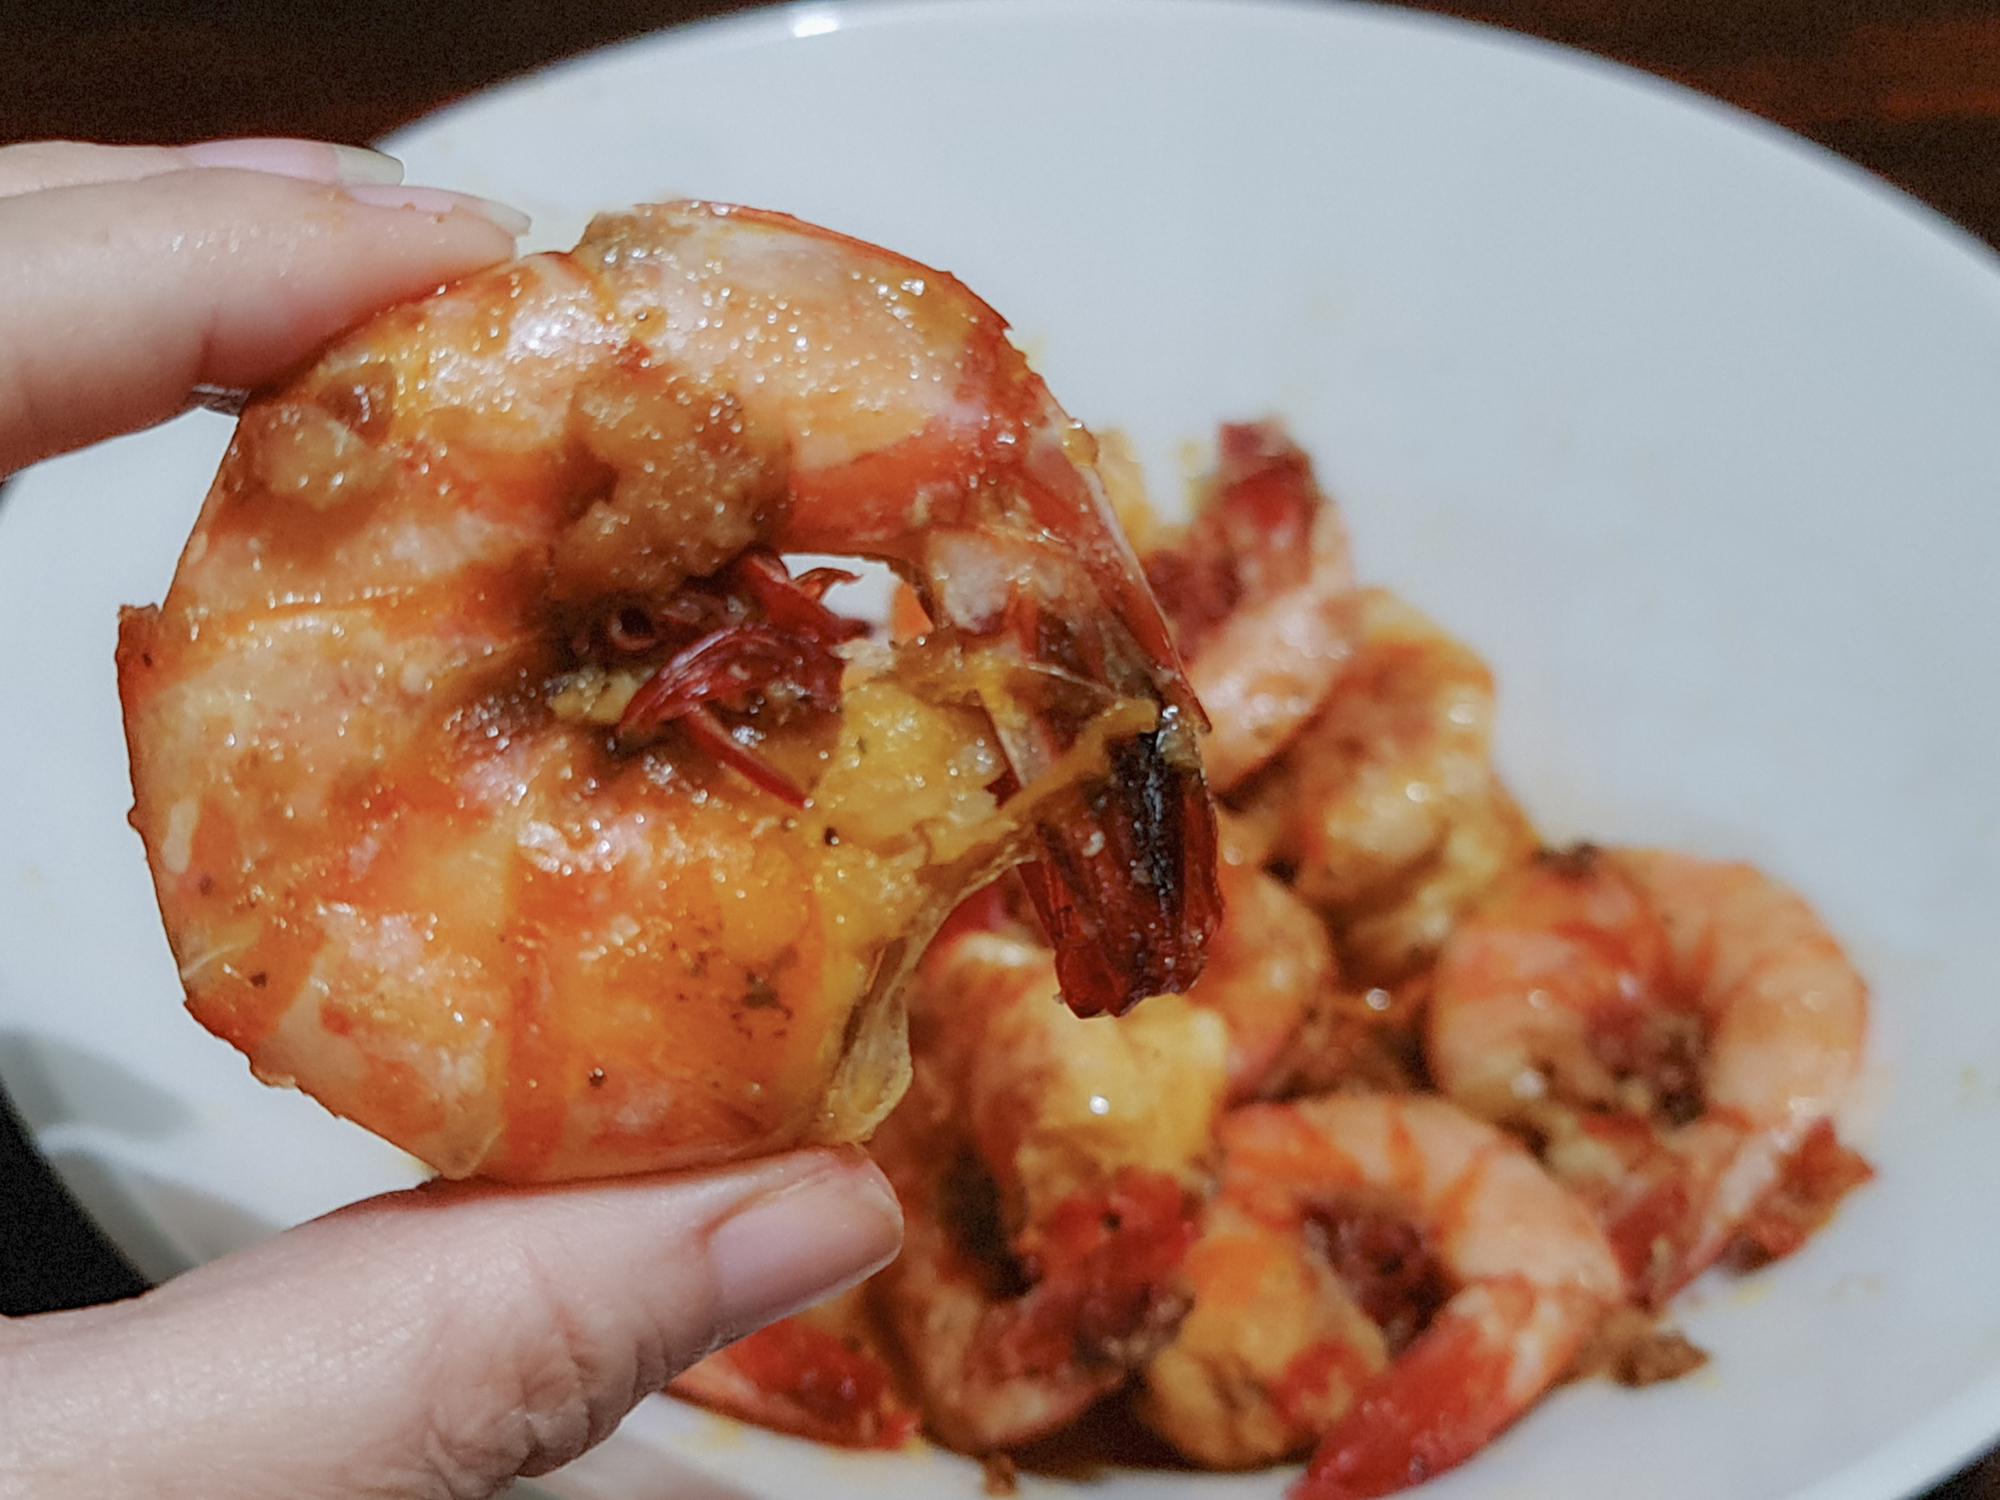 Close-up of a hand holding a cooked shrimp with more shrimp on a plate in the background